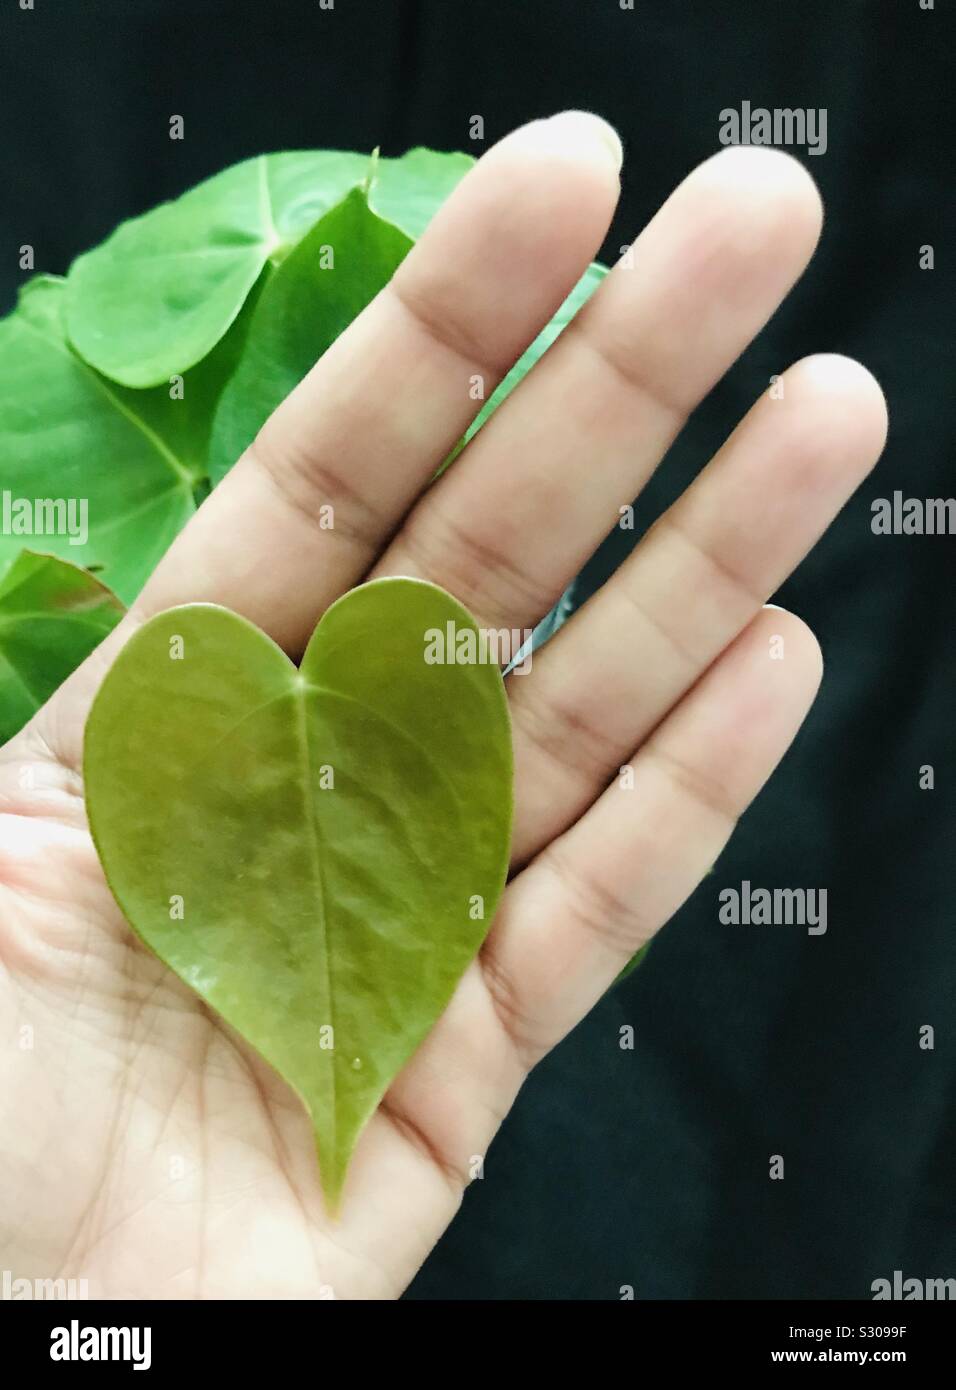 Cropped image, an anthurium leaf in hand, heart shape leaf -calathea-hand holding leaf Stock Photo